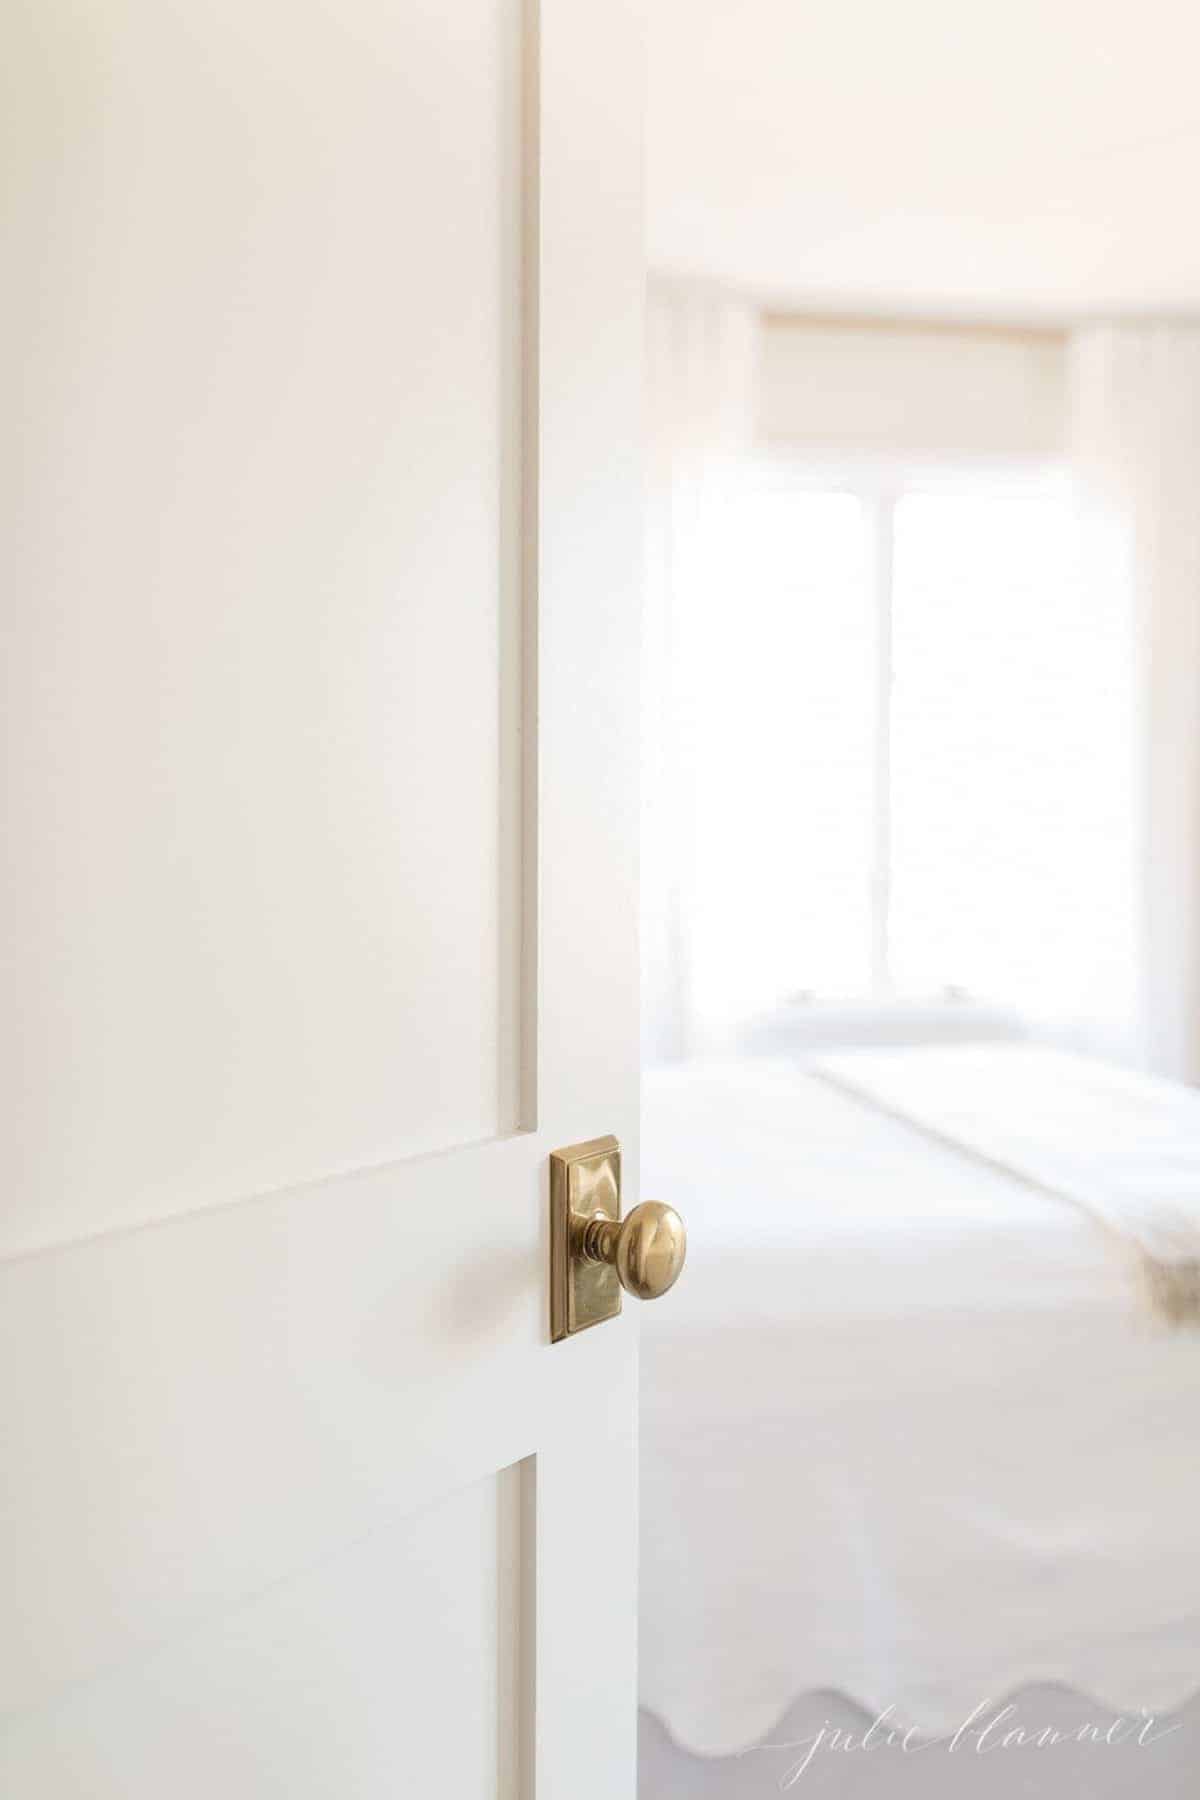 A white Shaker style door with a brass doorknob, opening into a bathroom.